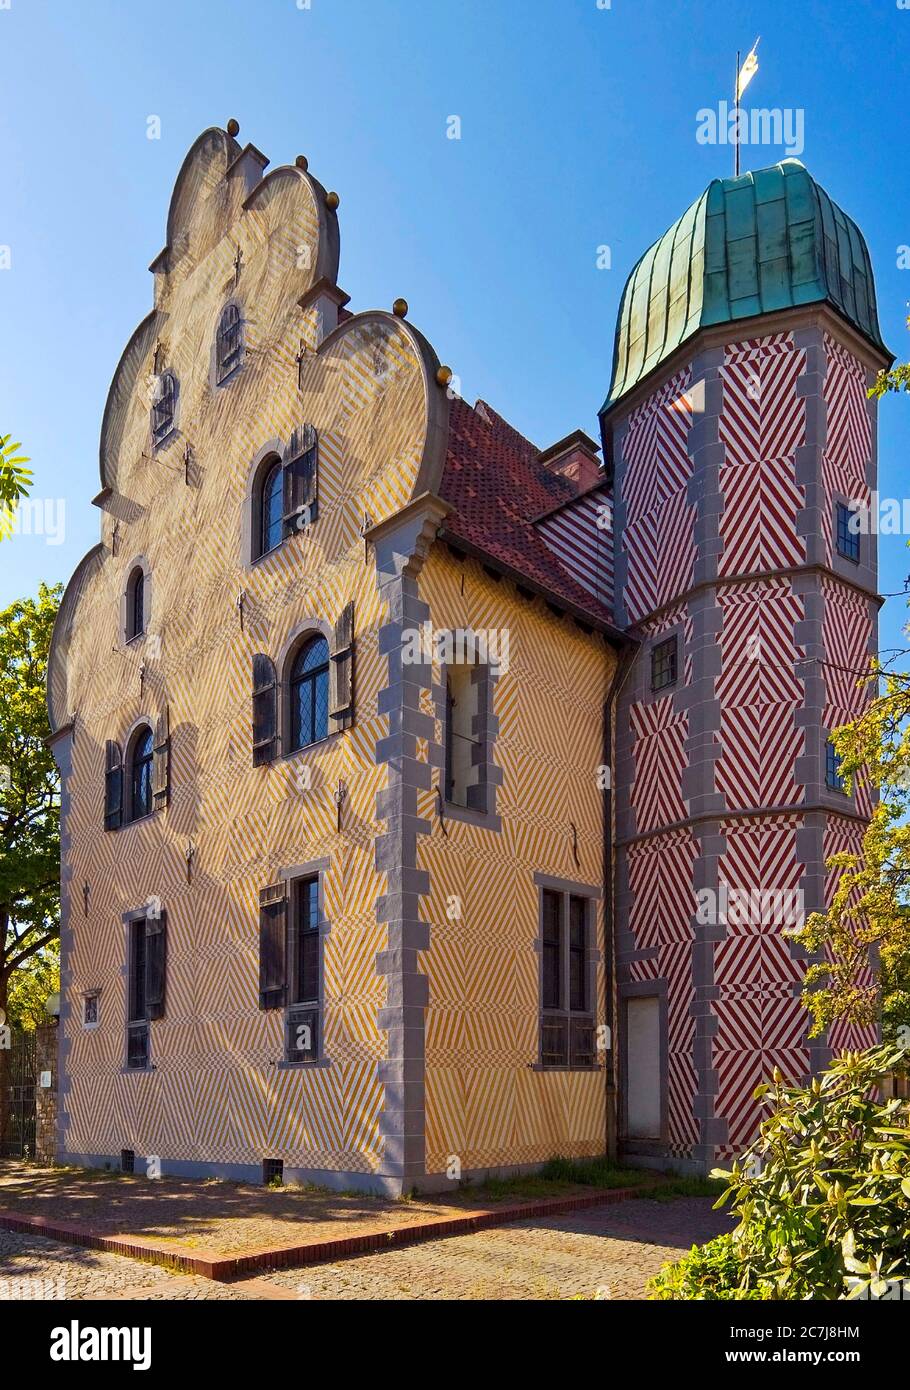 Ledenhof, former town house, today place of German Foundation for Peace Research, palas with stair turret, Germany, Lower Saxony, Osnabrueck Stock Photo